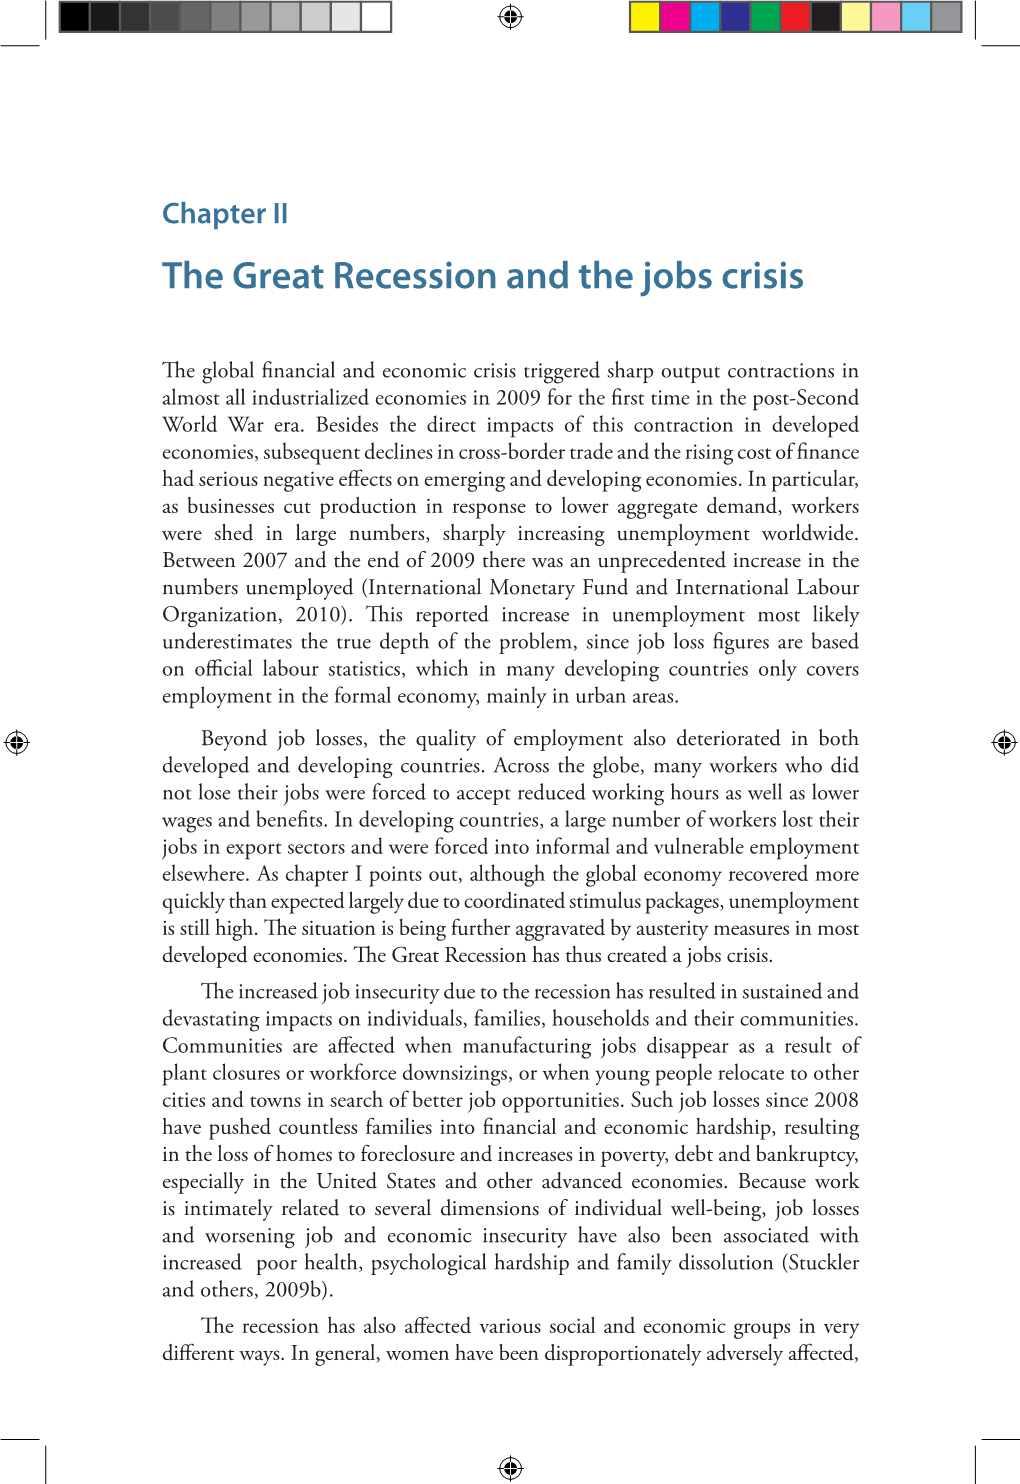 The Great Recession and the Jobs Crisis